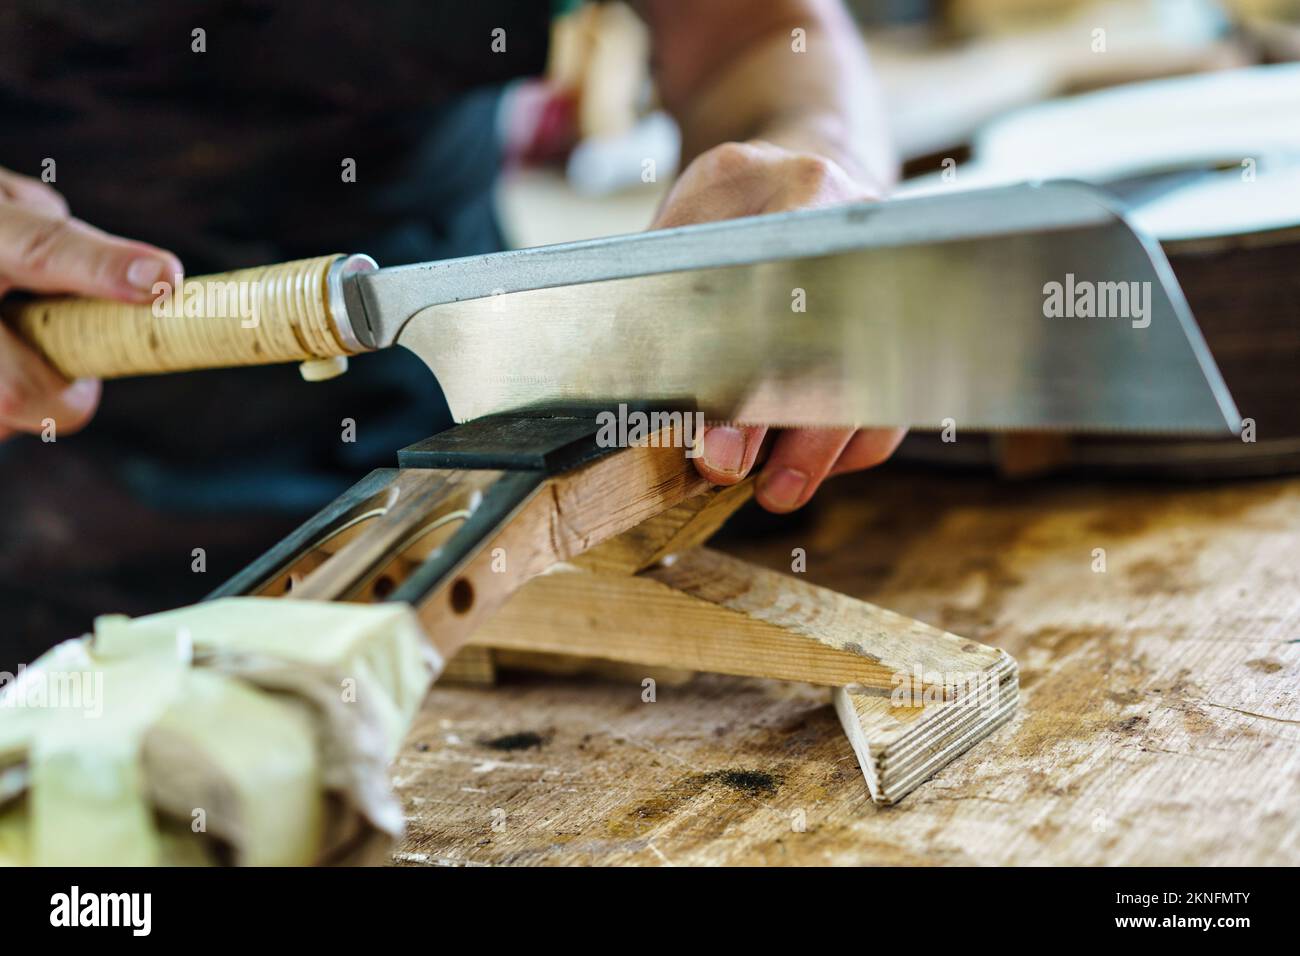 Spanish guitar maker marking the frets on the neck of a flamenco guitar. Stock Photo